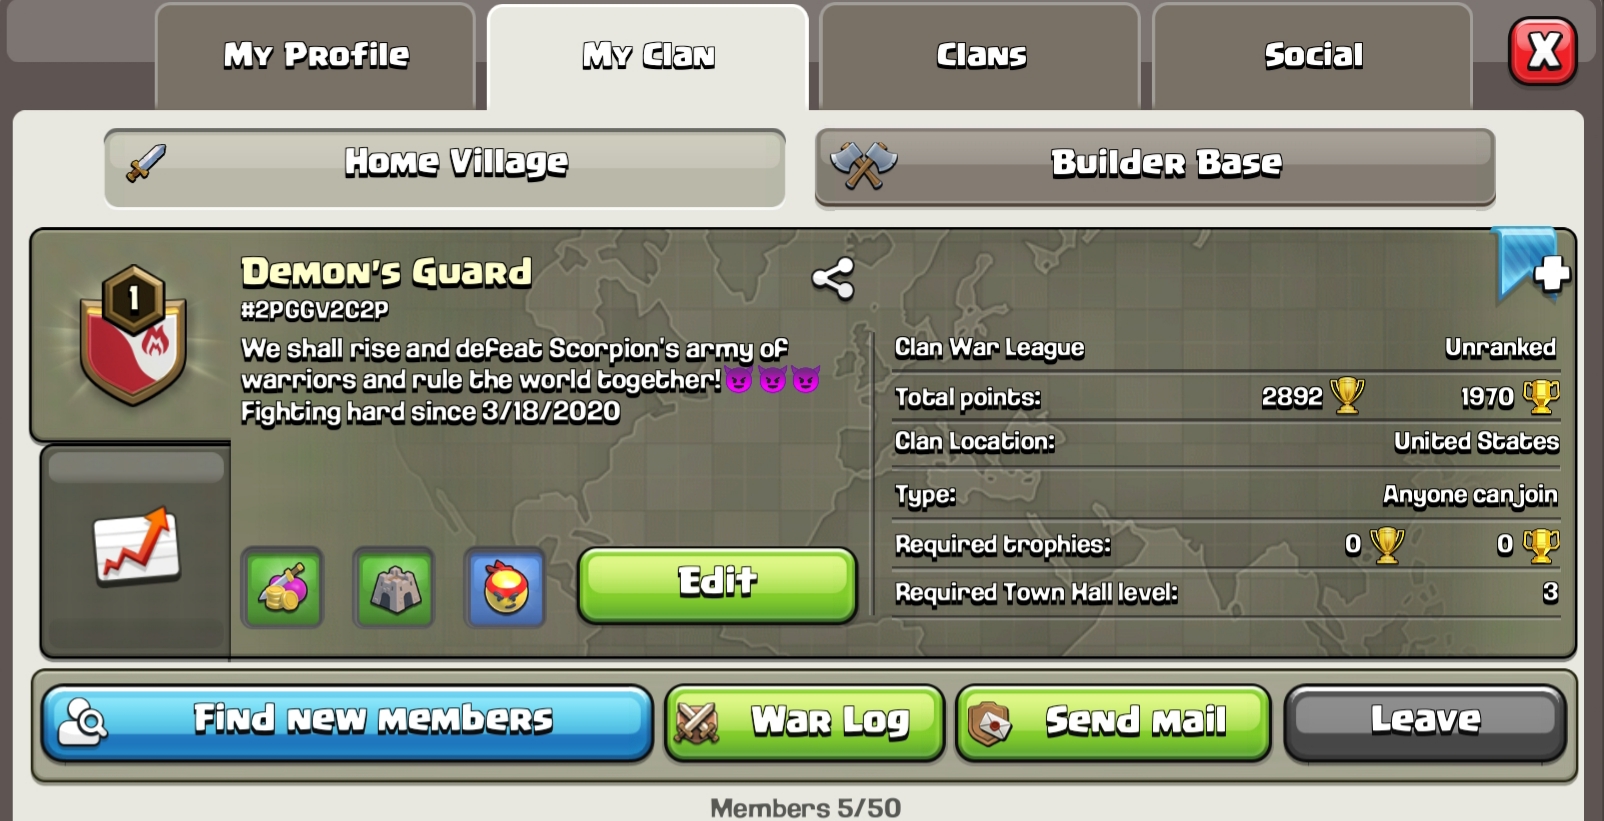 Please join my clan, we are war ready and looking for members to help us ru...